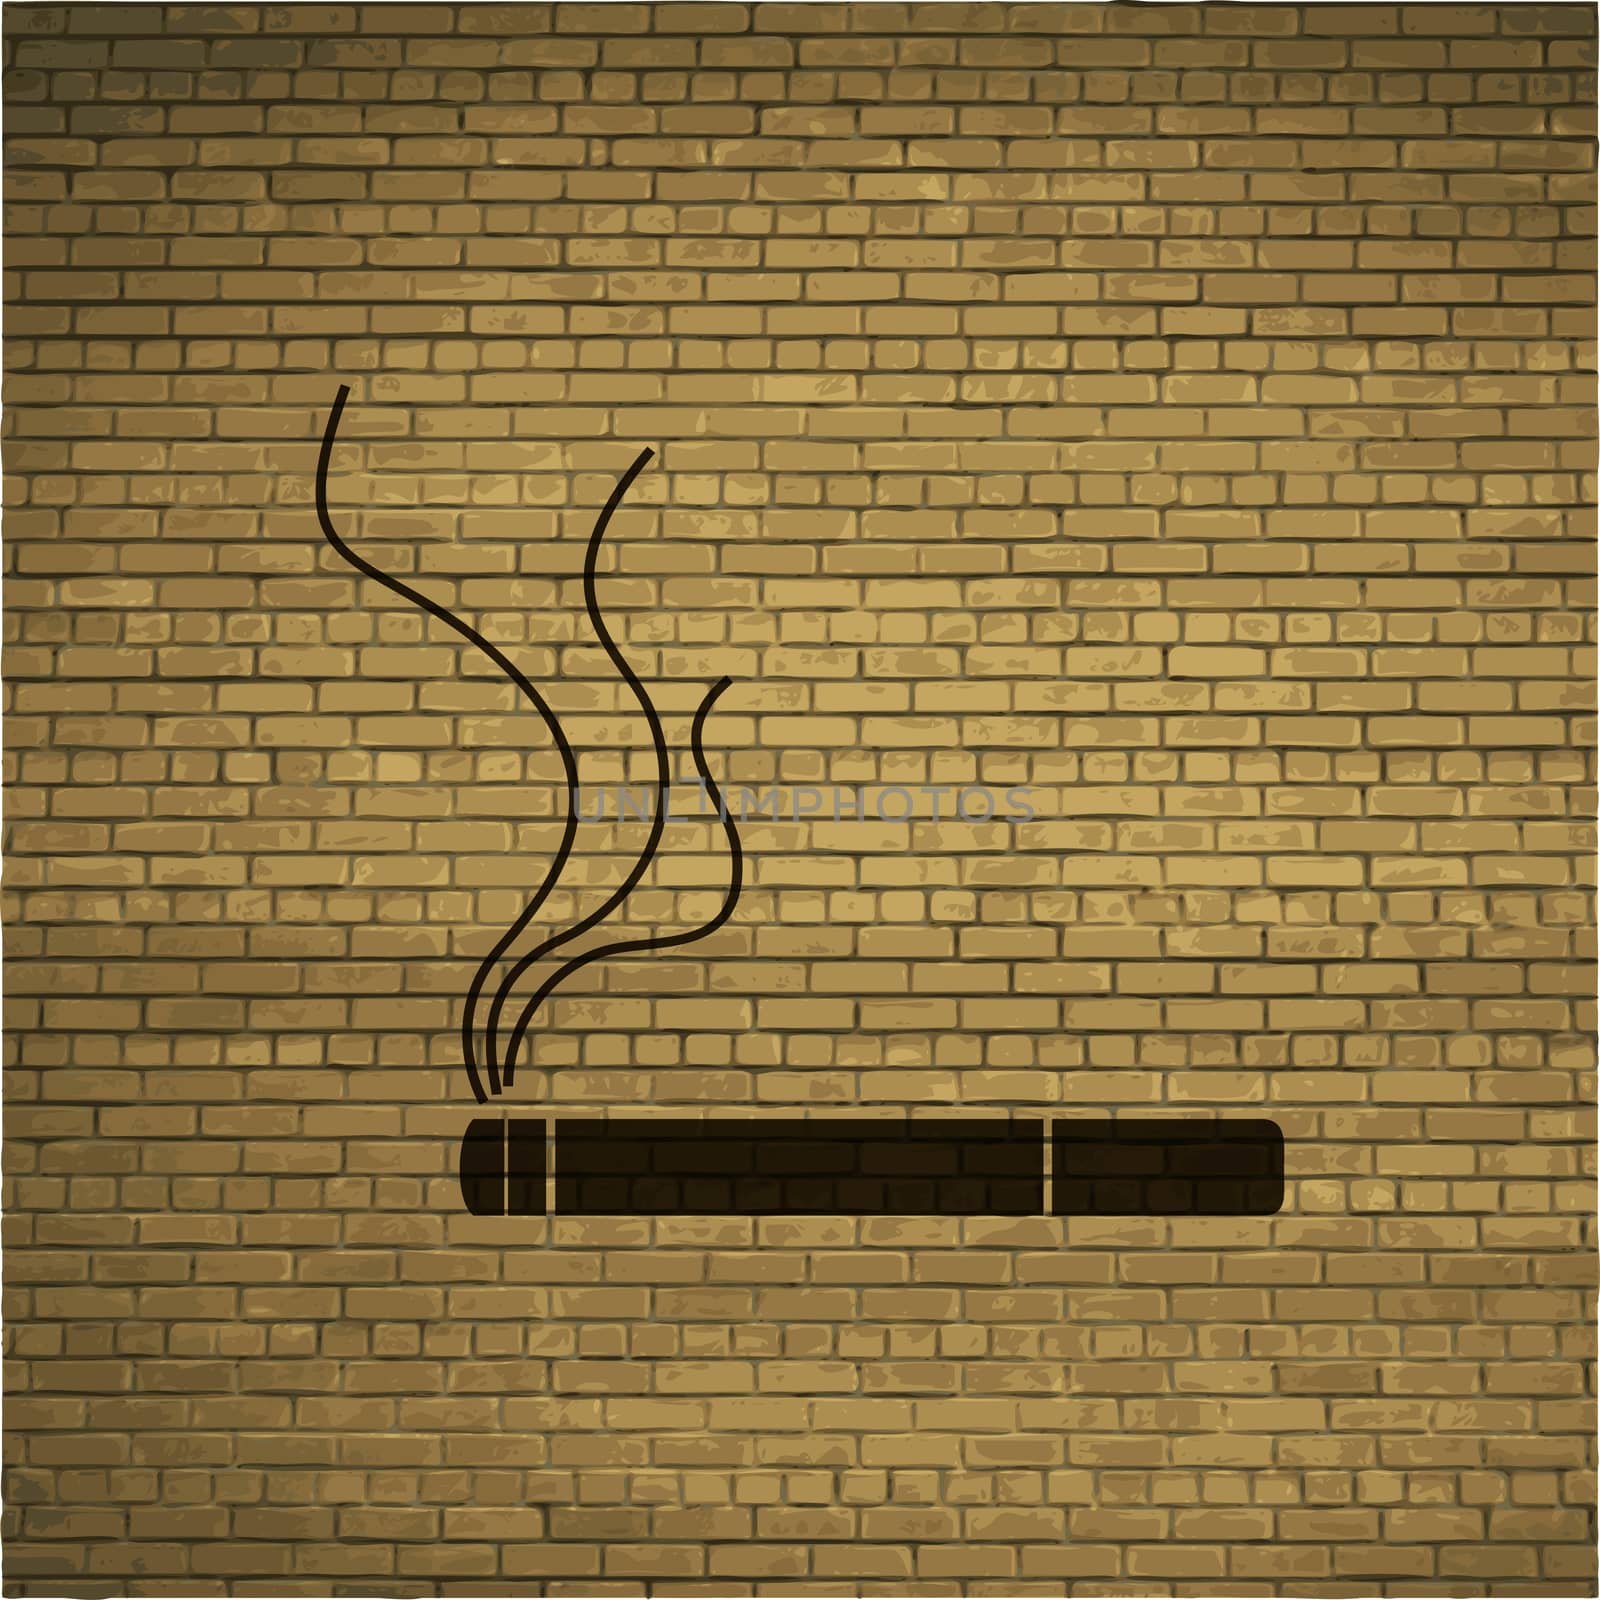 Smoking sign. cigarette icon. flat design with abstract background by serhii_lohvyniuk